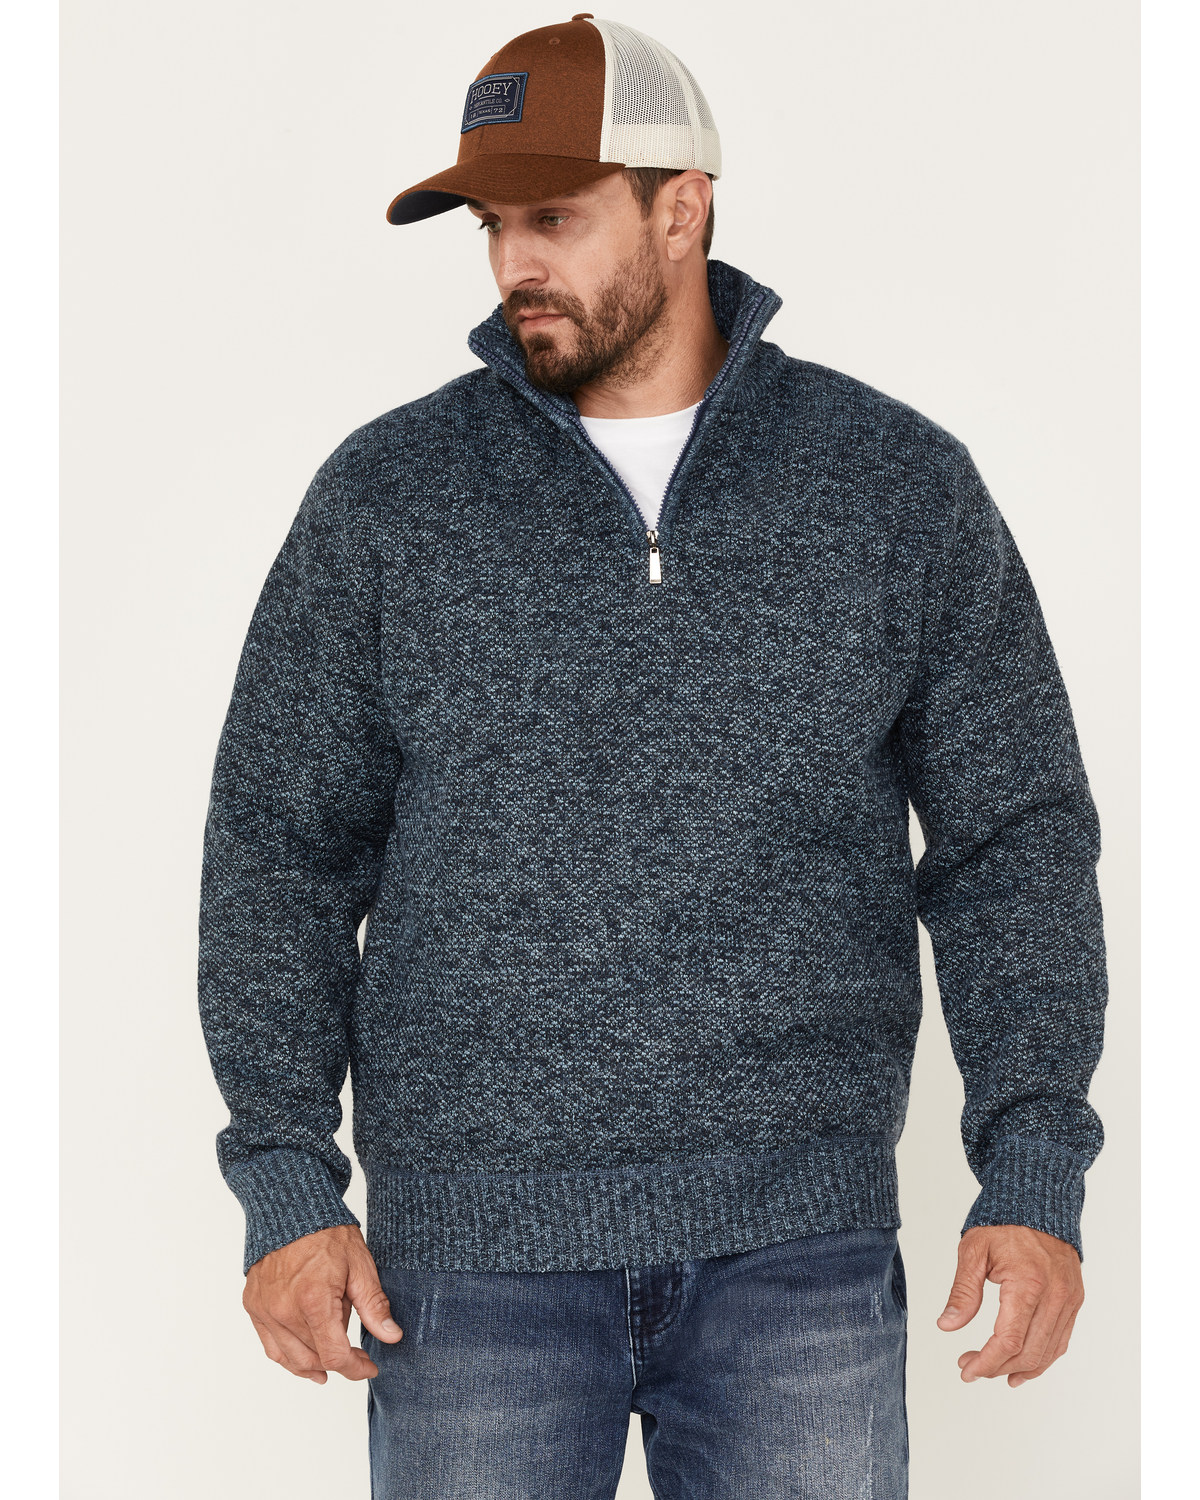 Pacific Teaze Men's 1/4 Zip Pullover Plaid Lined Bonded Sweater